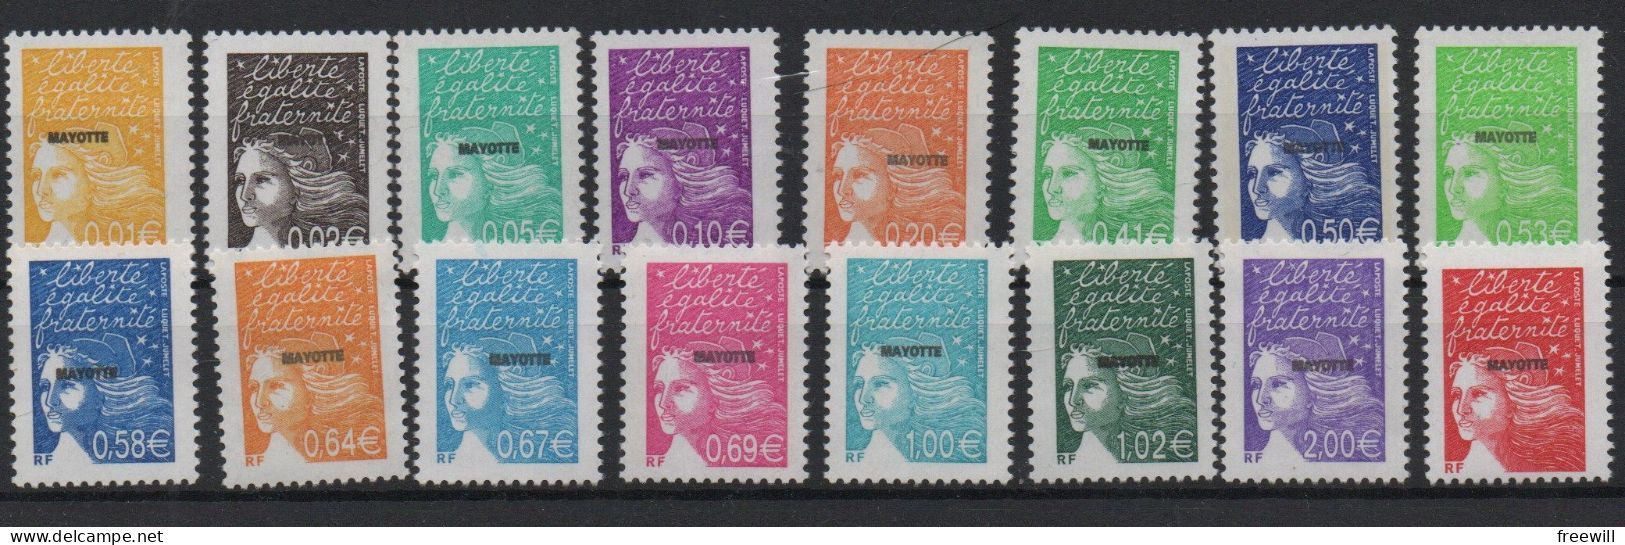 Mayotte Timbres Courants 2002 XXX - Neufs